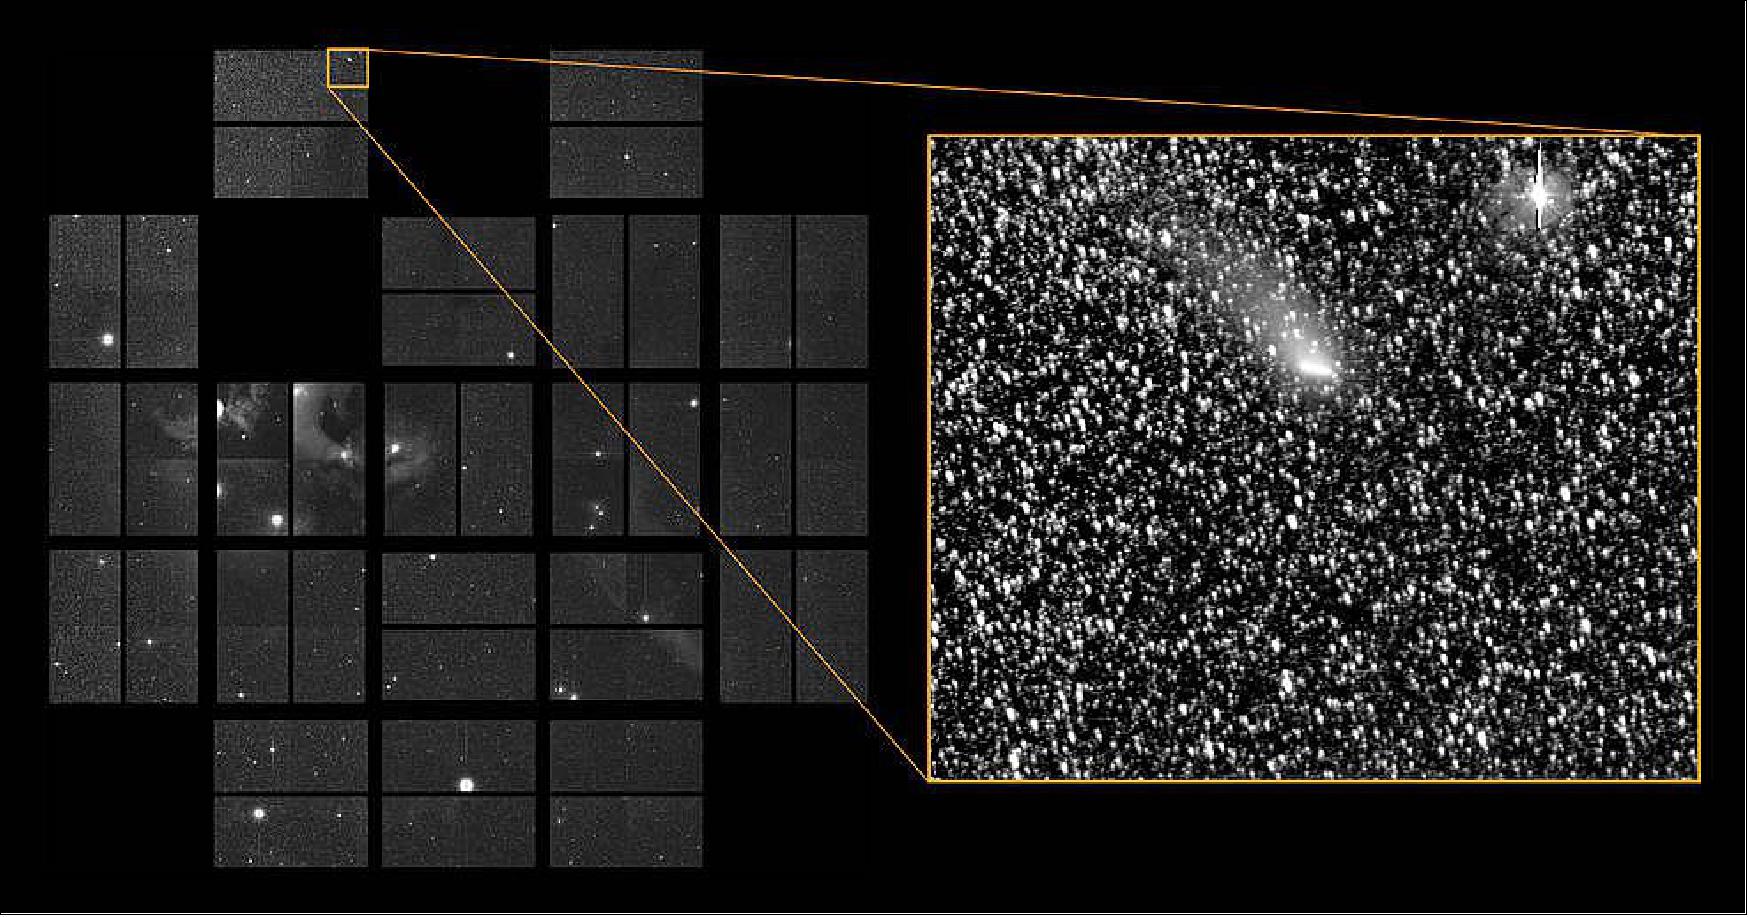 Figure 53: Comet Siding Spring passes through K2's FOV: On Oct. 20, 2014 the Kepler spacecraft joined the fleet of NASA science assets that observed distant Oort Cloud native Comet Siding Spring as it passed through K2's Campaign 2 FOV on its long journey around the sun. The data collected by K2 will add to the study of the comet, giving scientists an invaluable opportunity to learn more about the materials, including water and carbon compounds, that existed during the formation of the solar system 4.6 billion years ago (image credit: NASA Ames/W Stenzel; SETI Institute/D Caldwell)